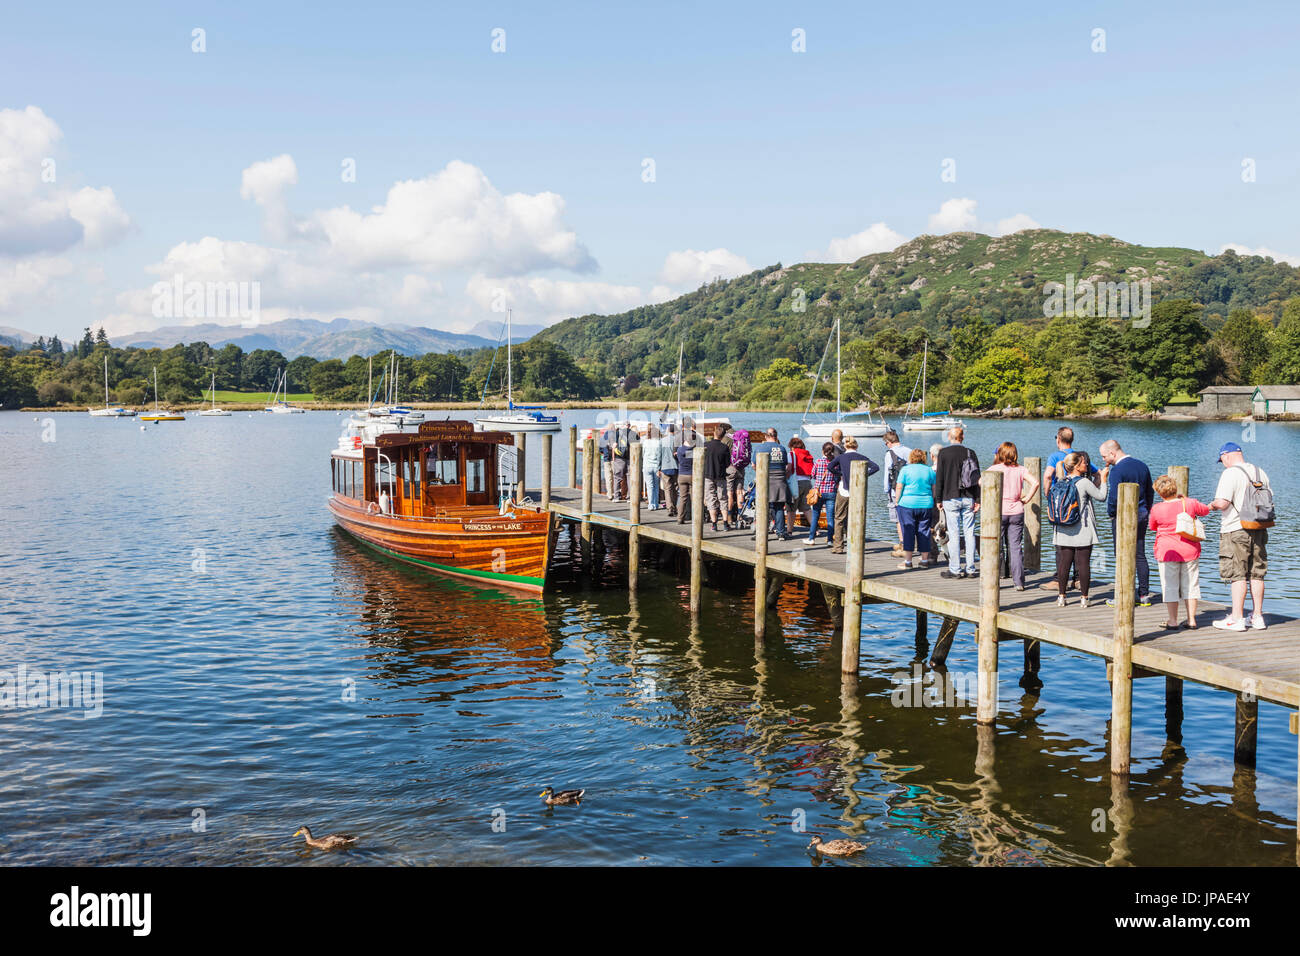 England, Cumbria, Lake District, Windermere, Ambleside, Tourists Boarding Sightseeing Boat Stock Photo